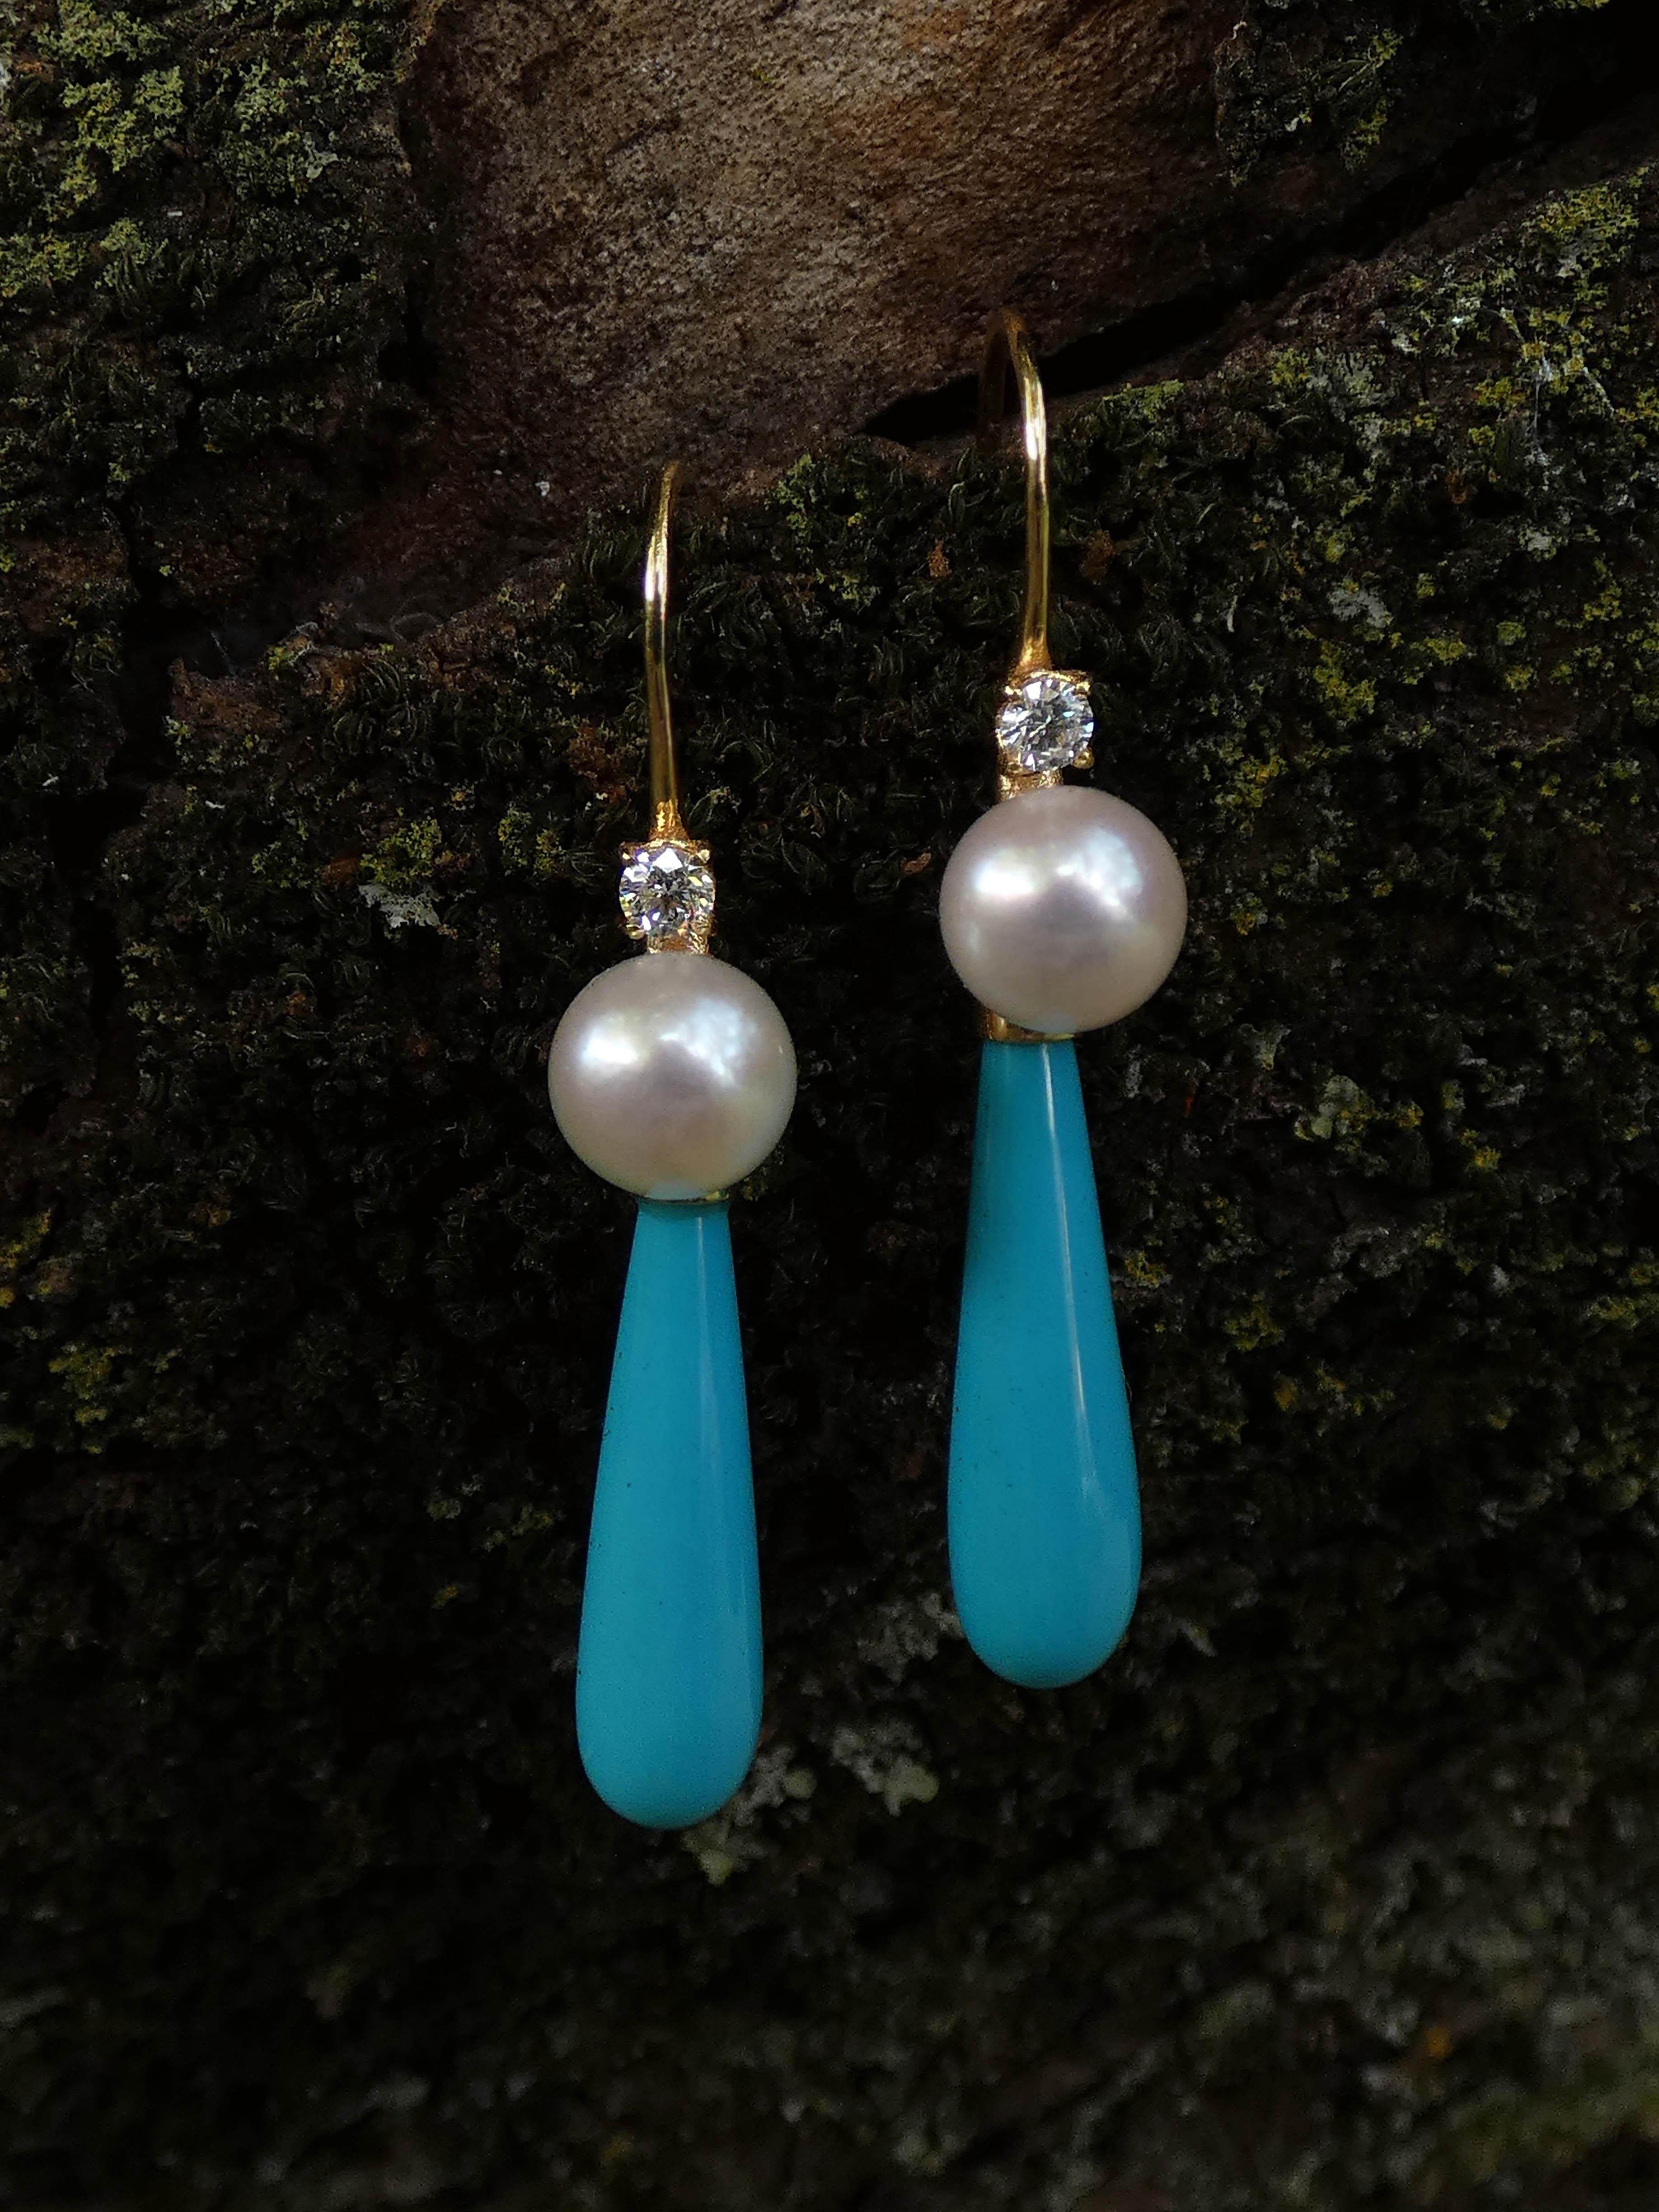 Made to order 18k Yellow gold earrings with 11.2 Cts Excellent Quality Natural TURQUOIS teardrop Shape and natural diamonds 0.14 cts G VS, Natural Akoya white pearl
Italian jewelry made in Italy.

Stones:
11.2Cts Excellent Quality TURQUOISE
size :